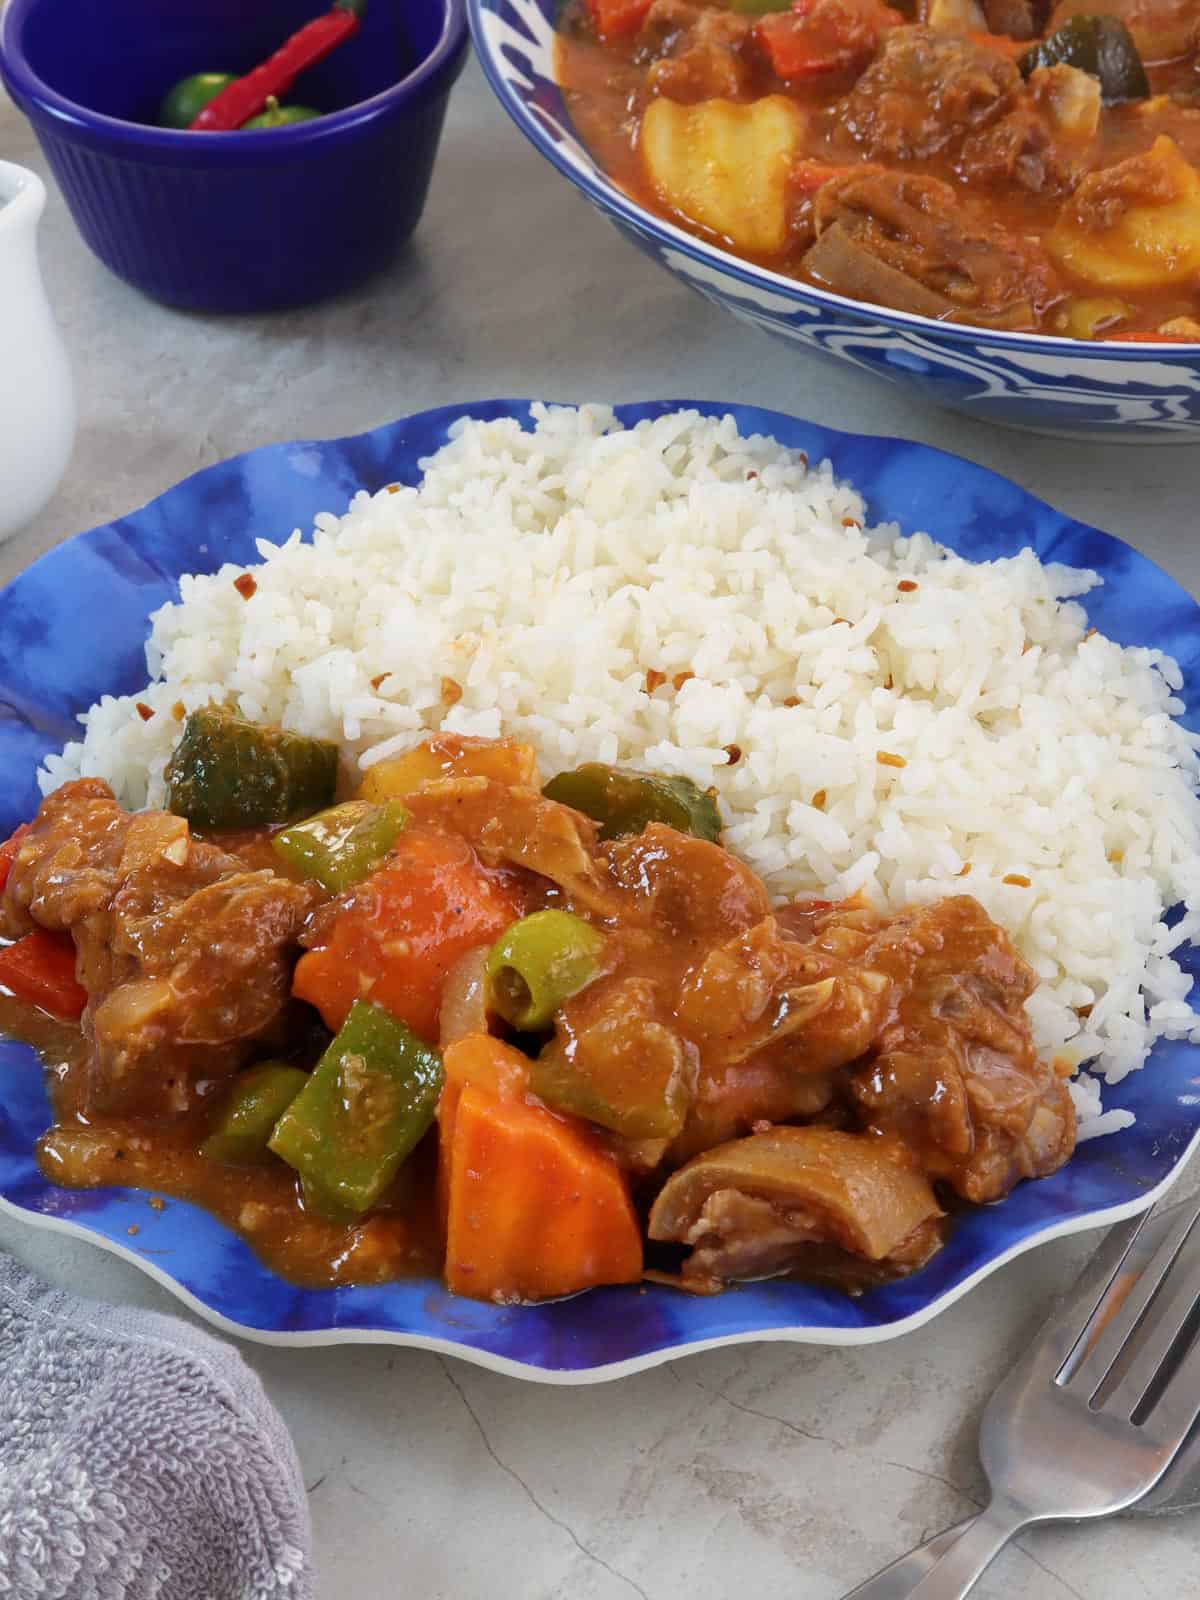 kambing caldereta with steamed rice on a blue plate